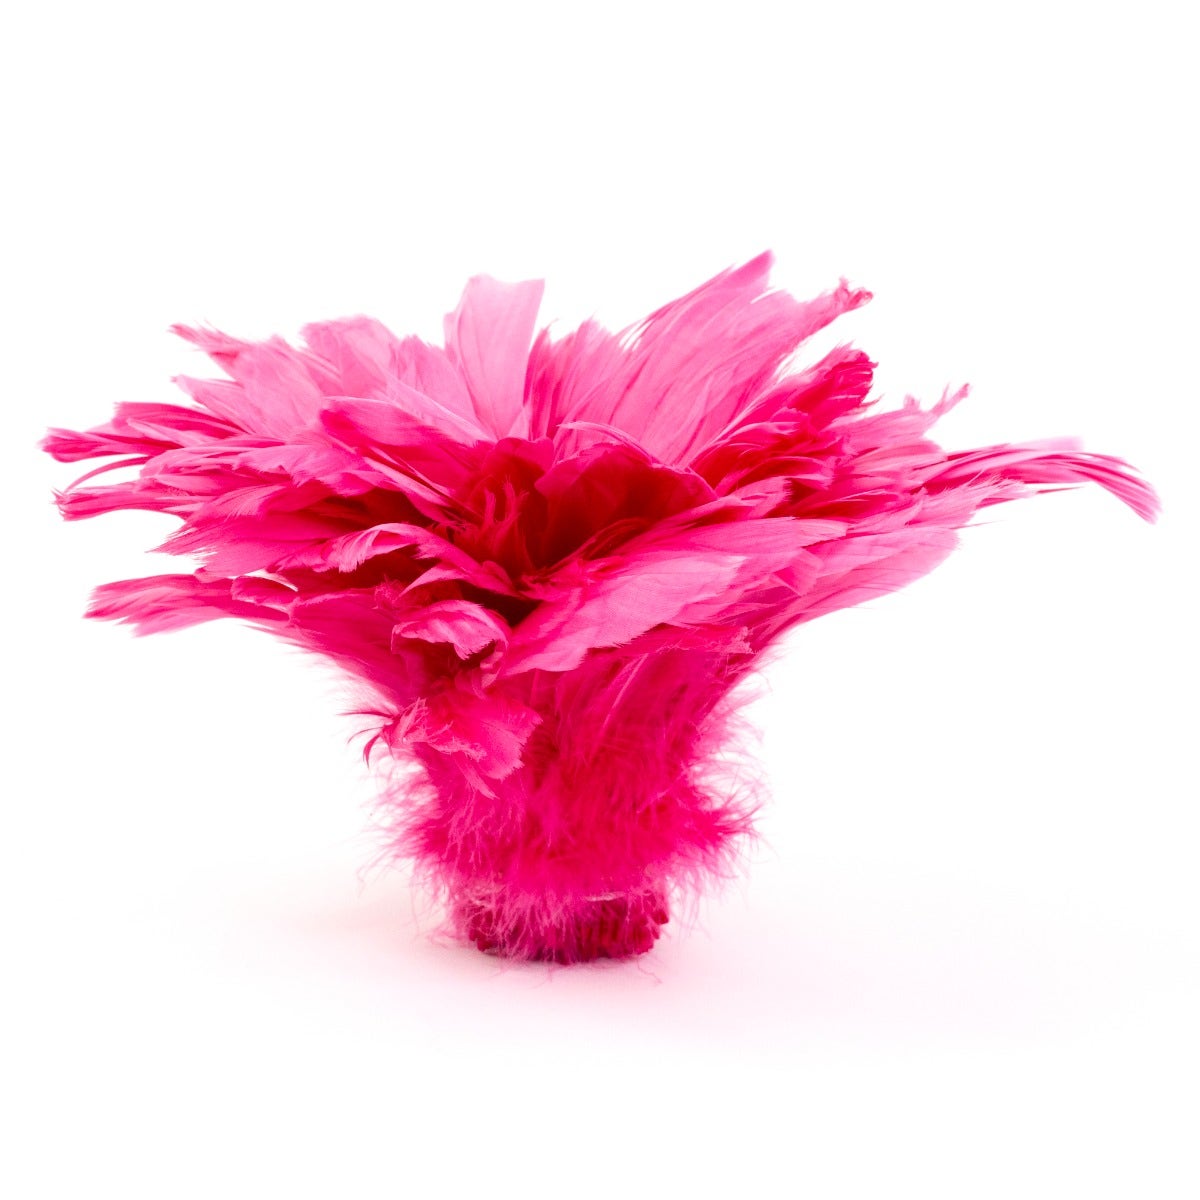 Goose Nagorie Dyed Red Feathers | Buy 5-6 Inches Bulk Feathers